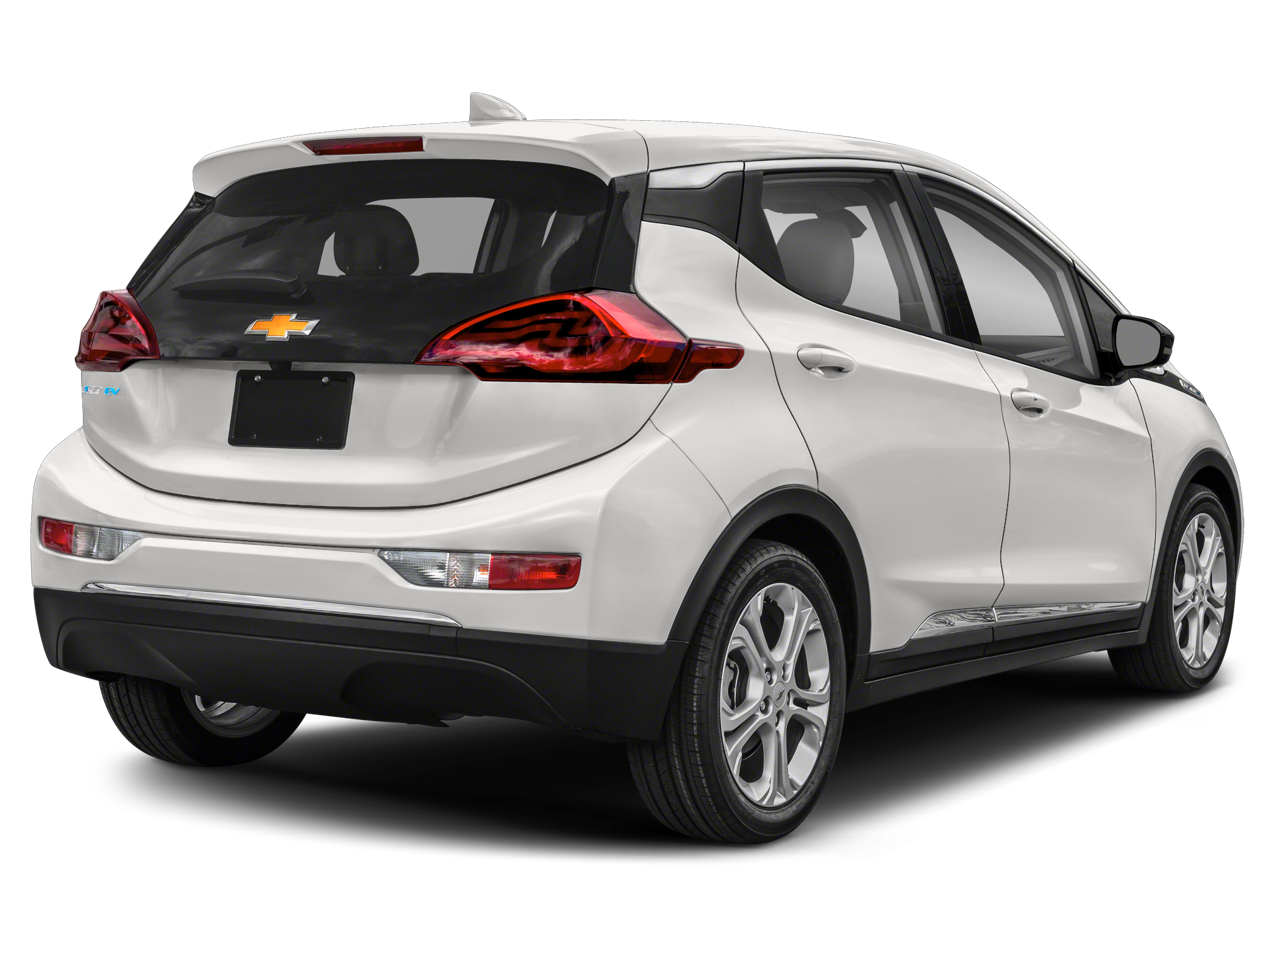 Used 2020 Chevrolet Bolt EV LT with VIN 1G1FY6S0XL4139867 for sale in Upland, CA